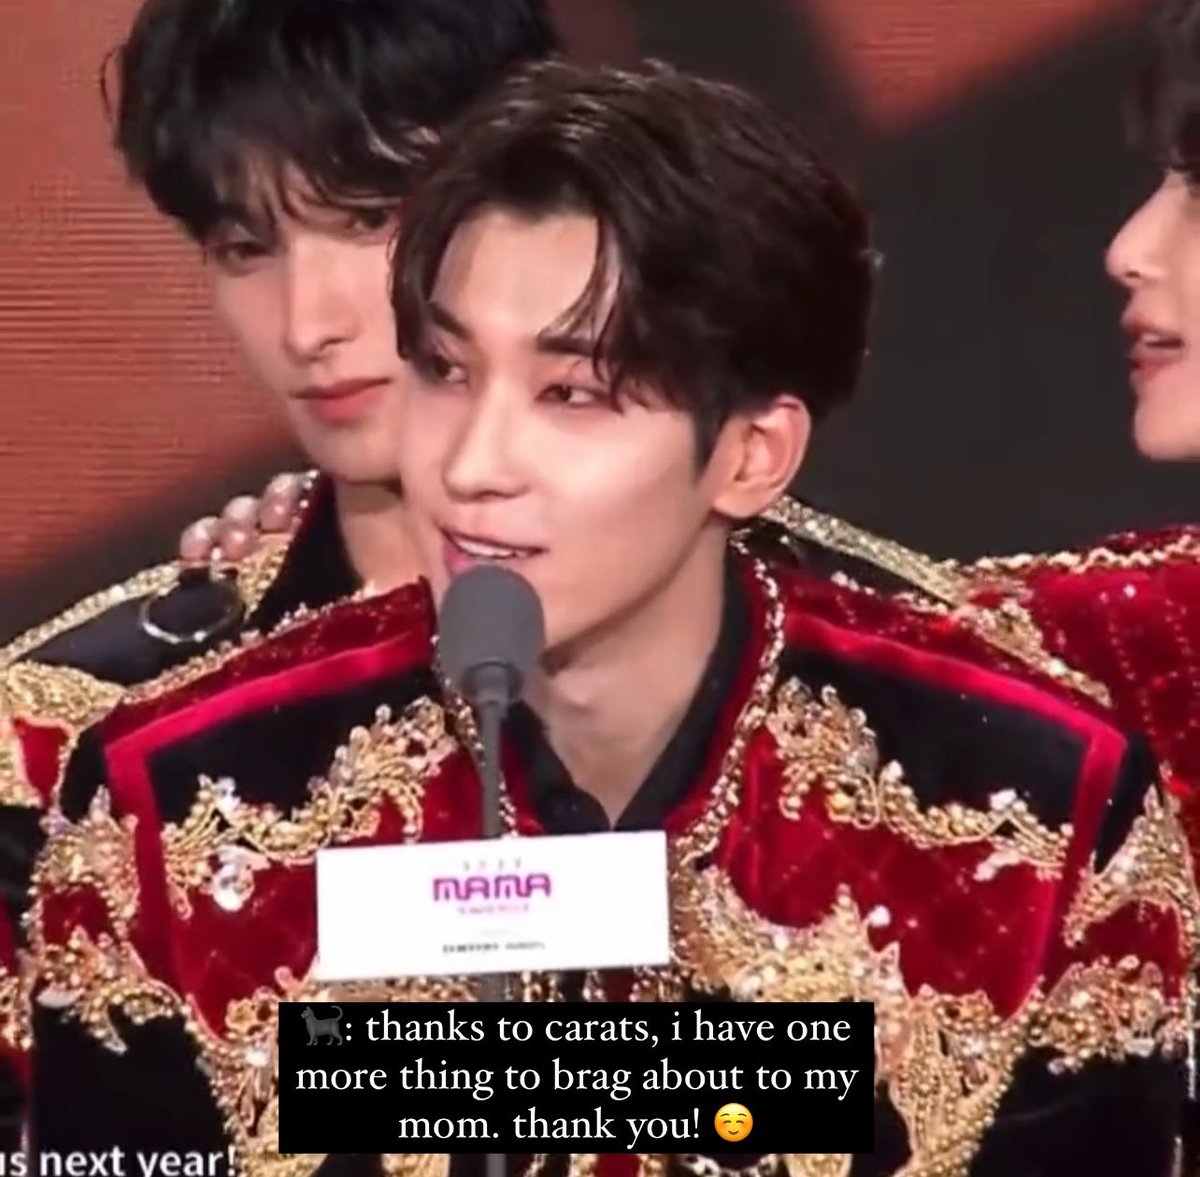 and you’ll have another thing to brag about today my wonu. you did it! (along w/ svt) she’s the proudest among all of us and mama jeon is looking at you with full glee cause you’re surrounded & loved by so many people. I LOVE YOU WONWOO! 🥹🫶🏻